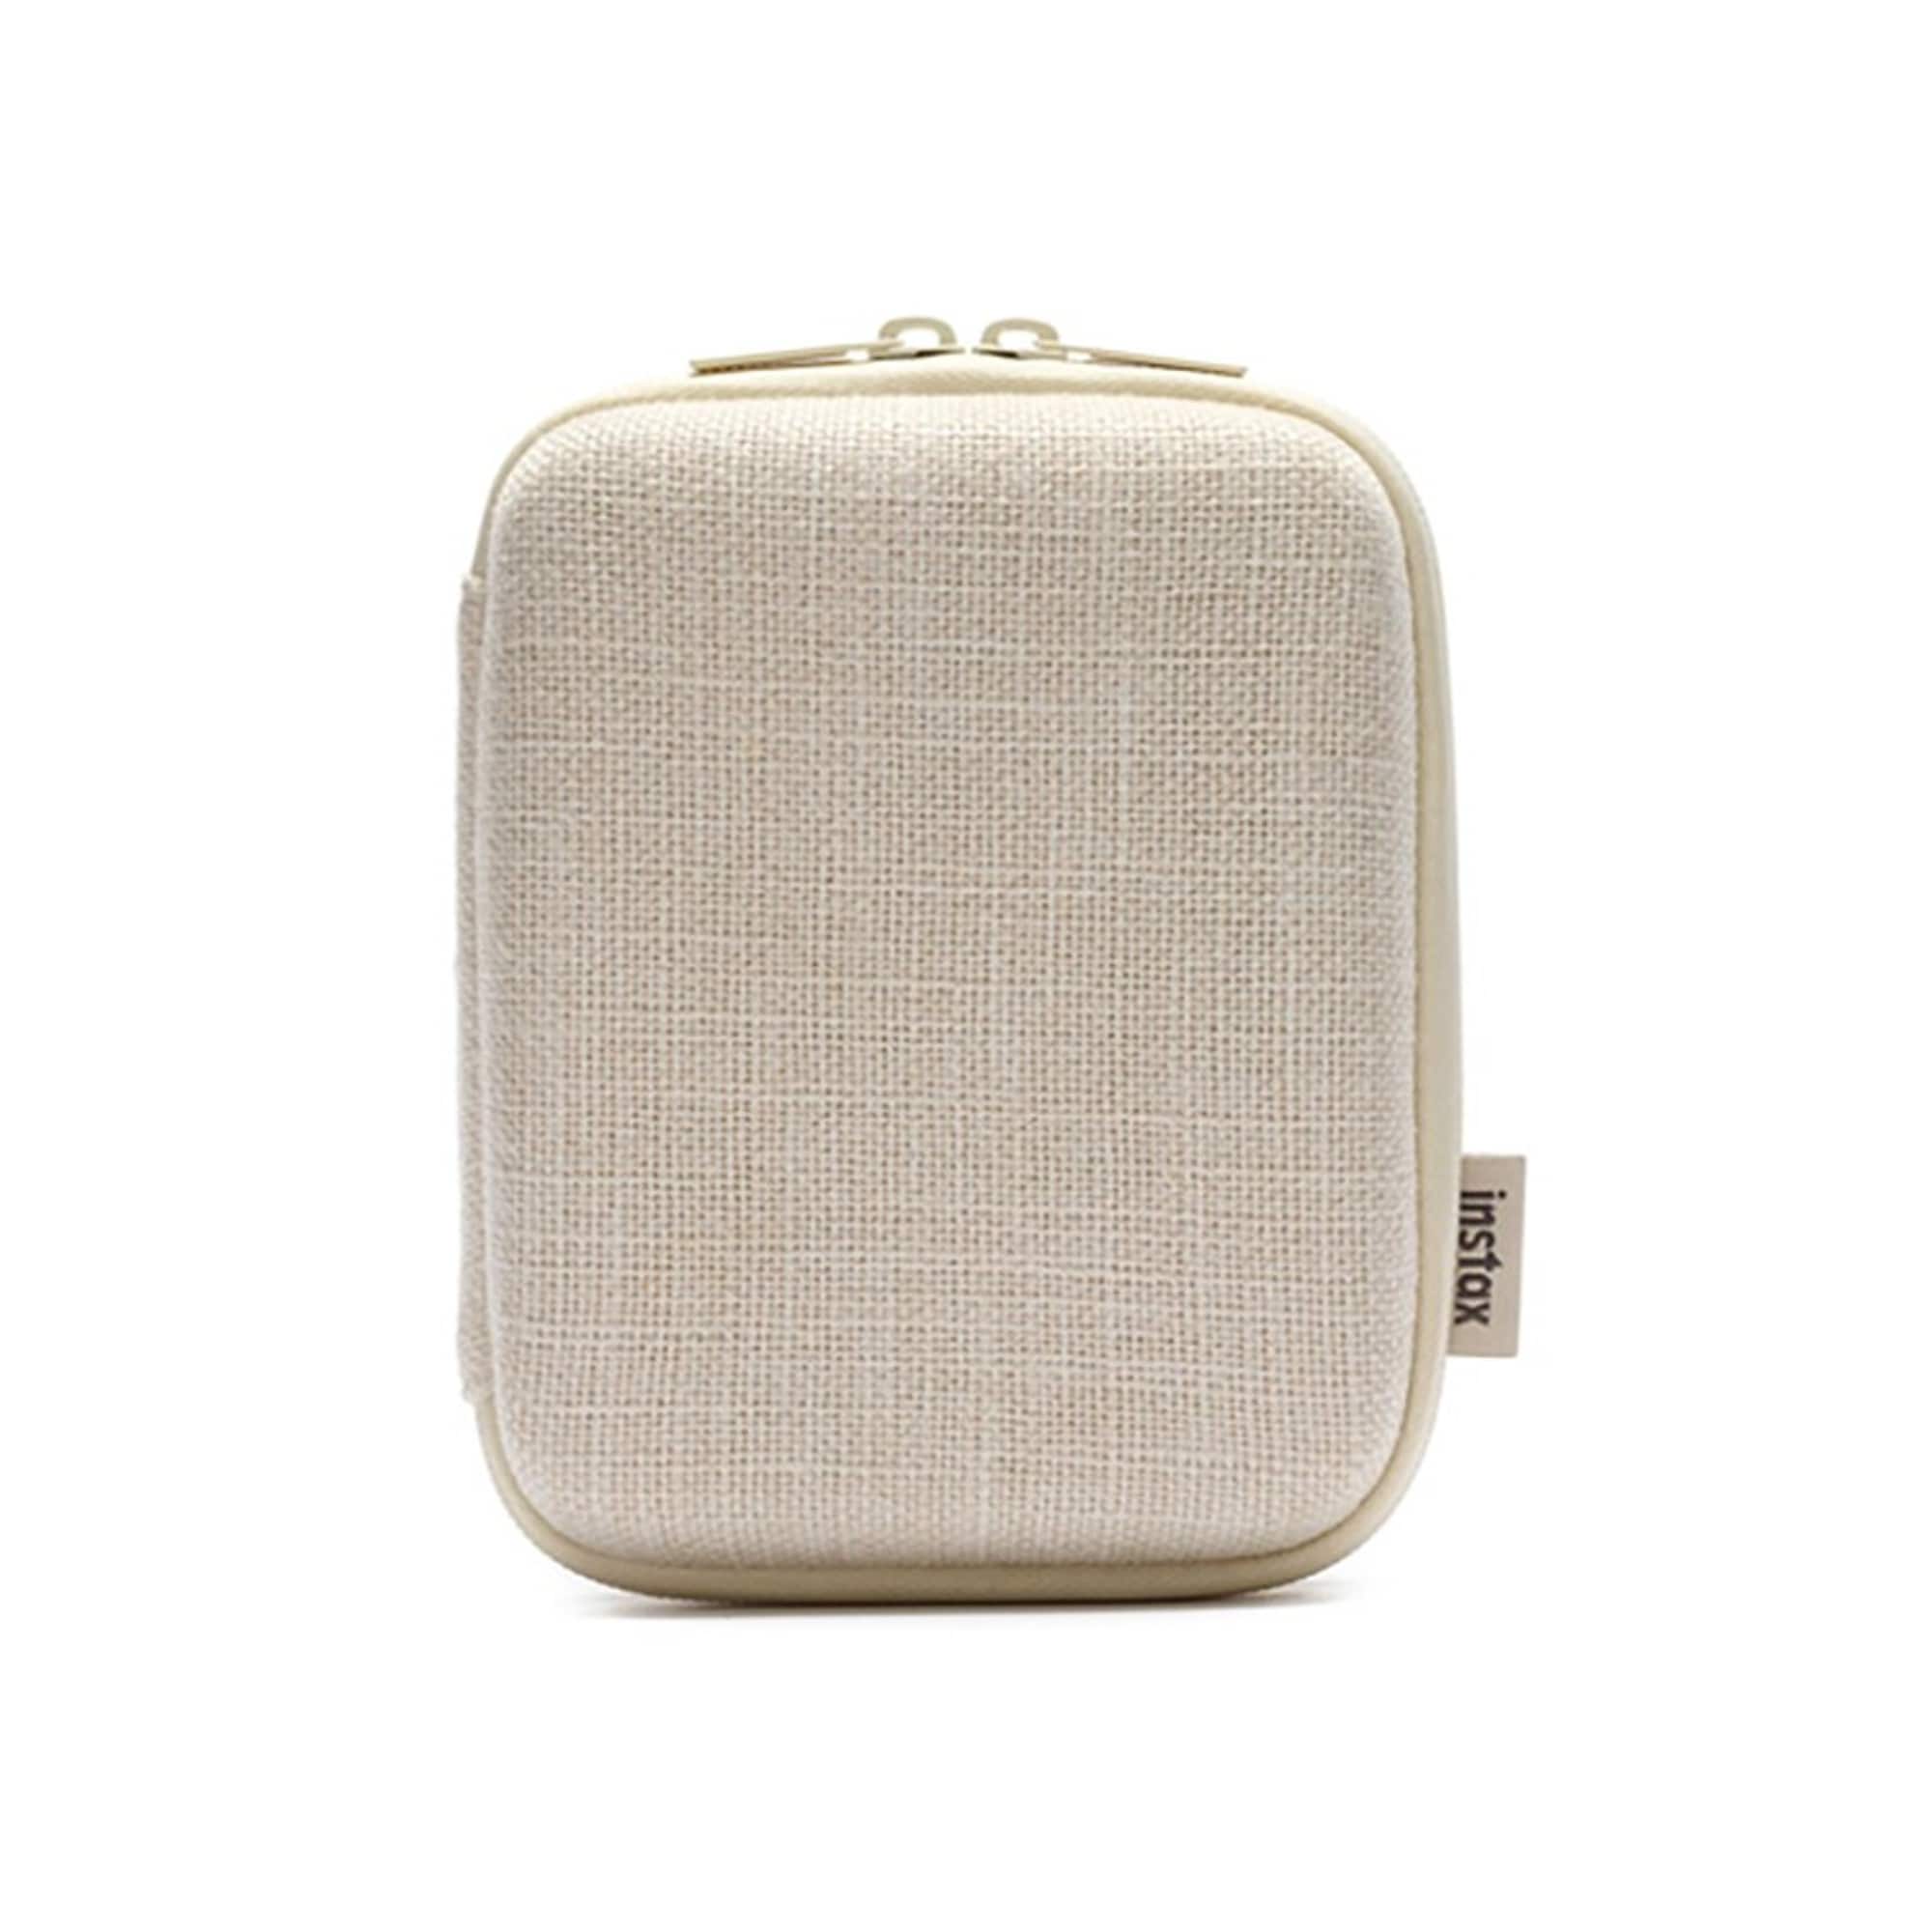 Fujifilm Instax Square Link Fodral Woven Ivory